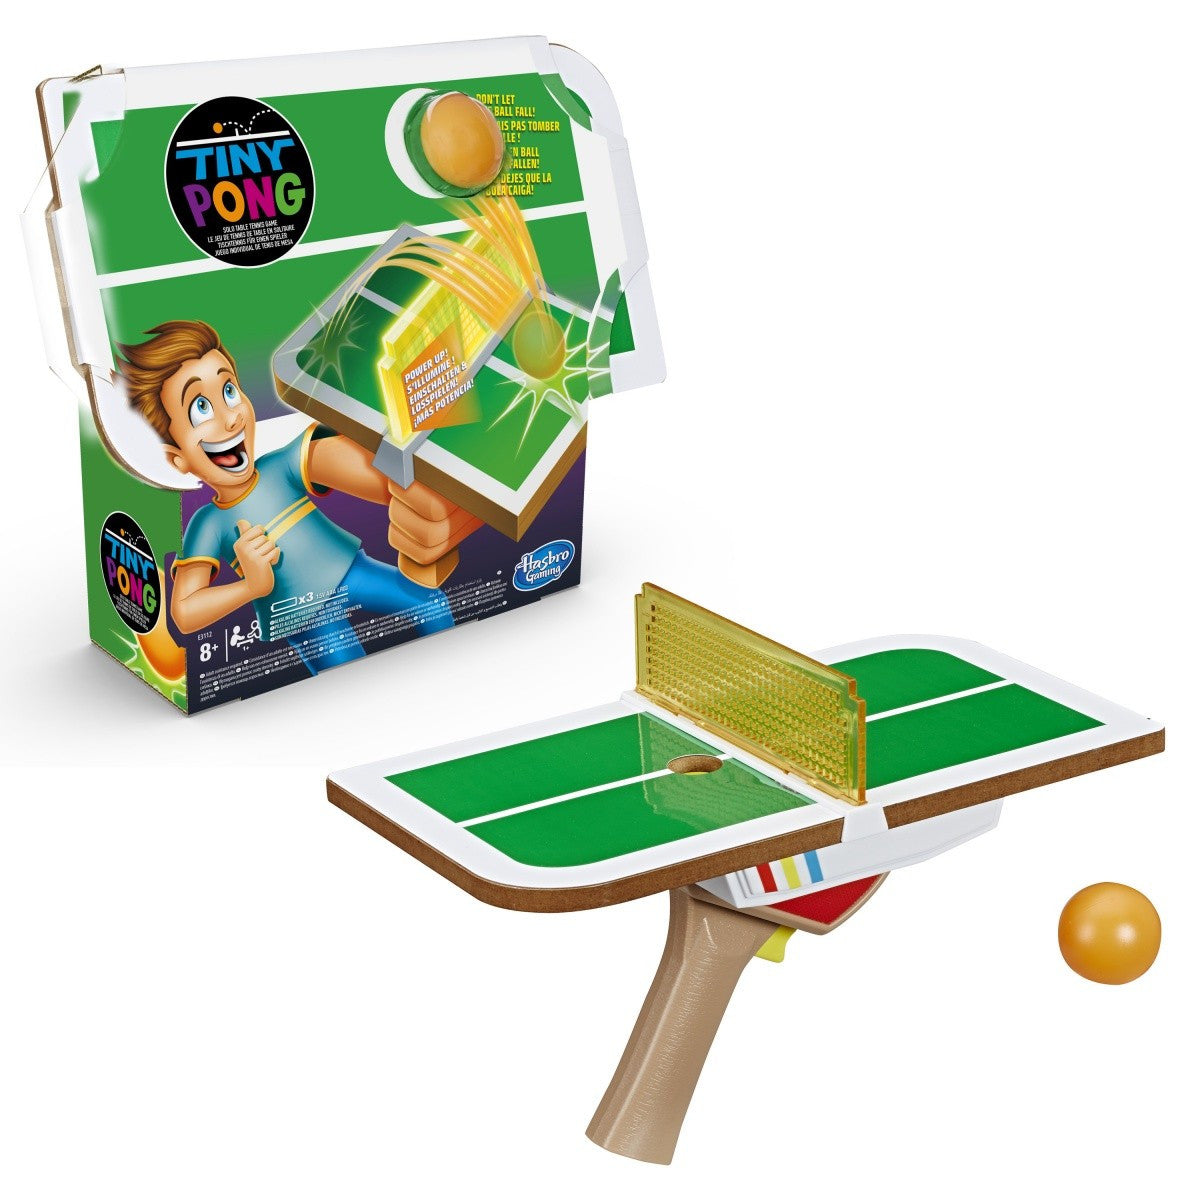 TINY Pong Solo Table Tennis Kids Electronic Handheld Game